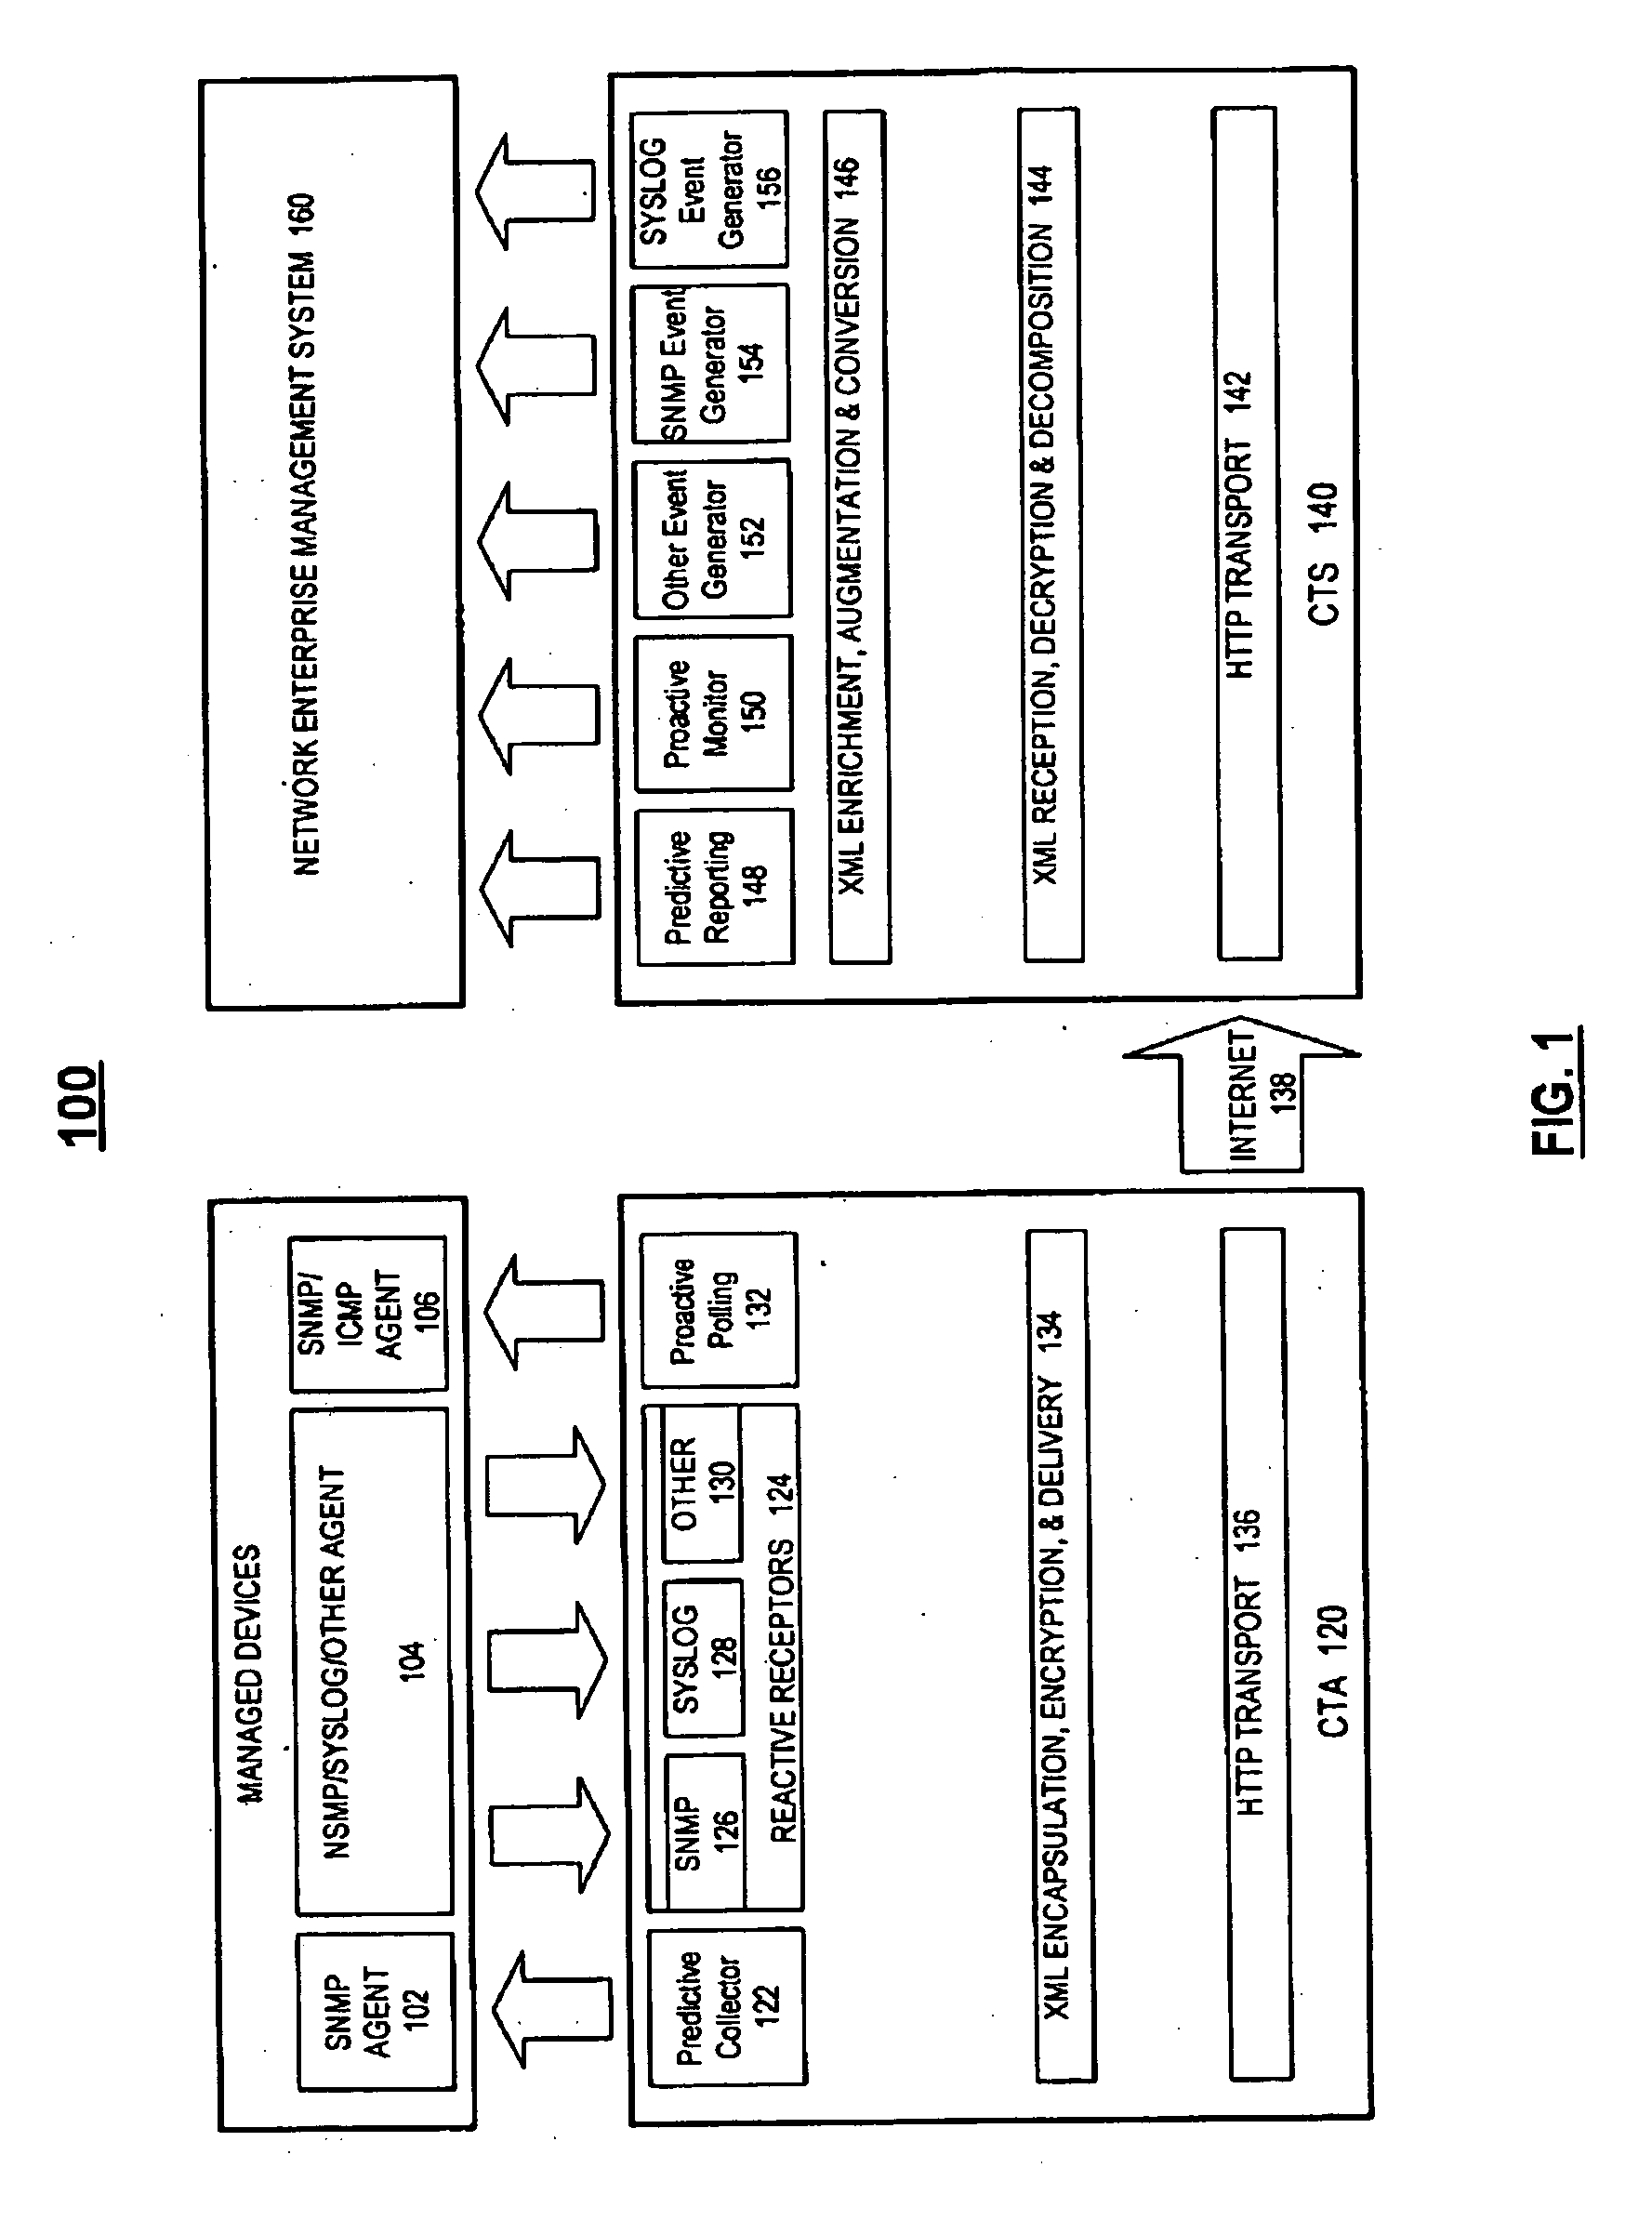 Method and system for remote management of customer servers